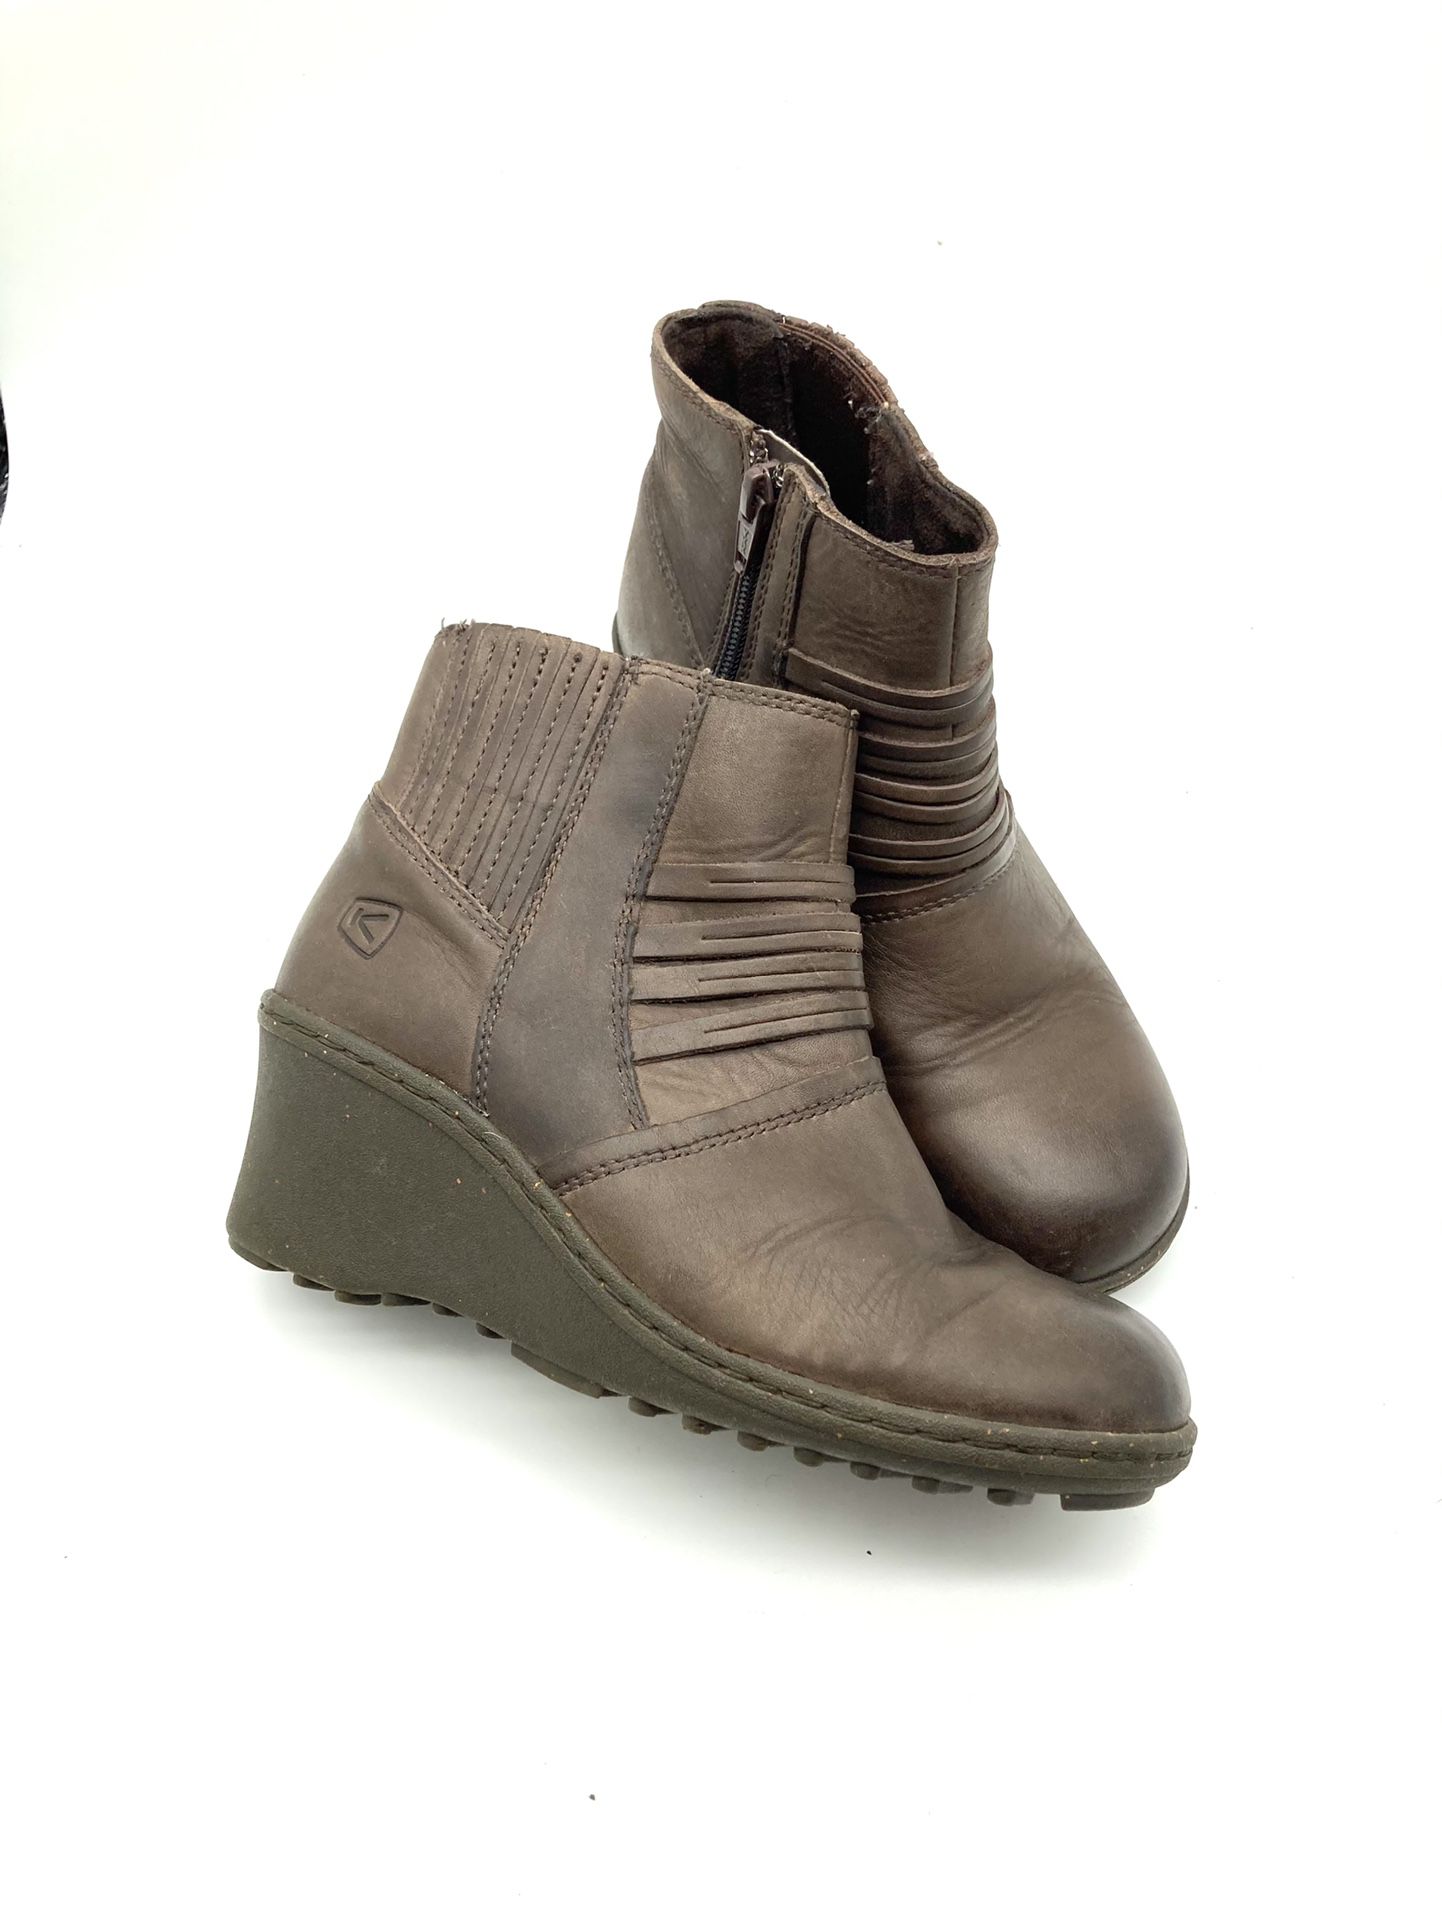 Keen Zurich Wedge Ankle Boots 